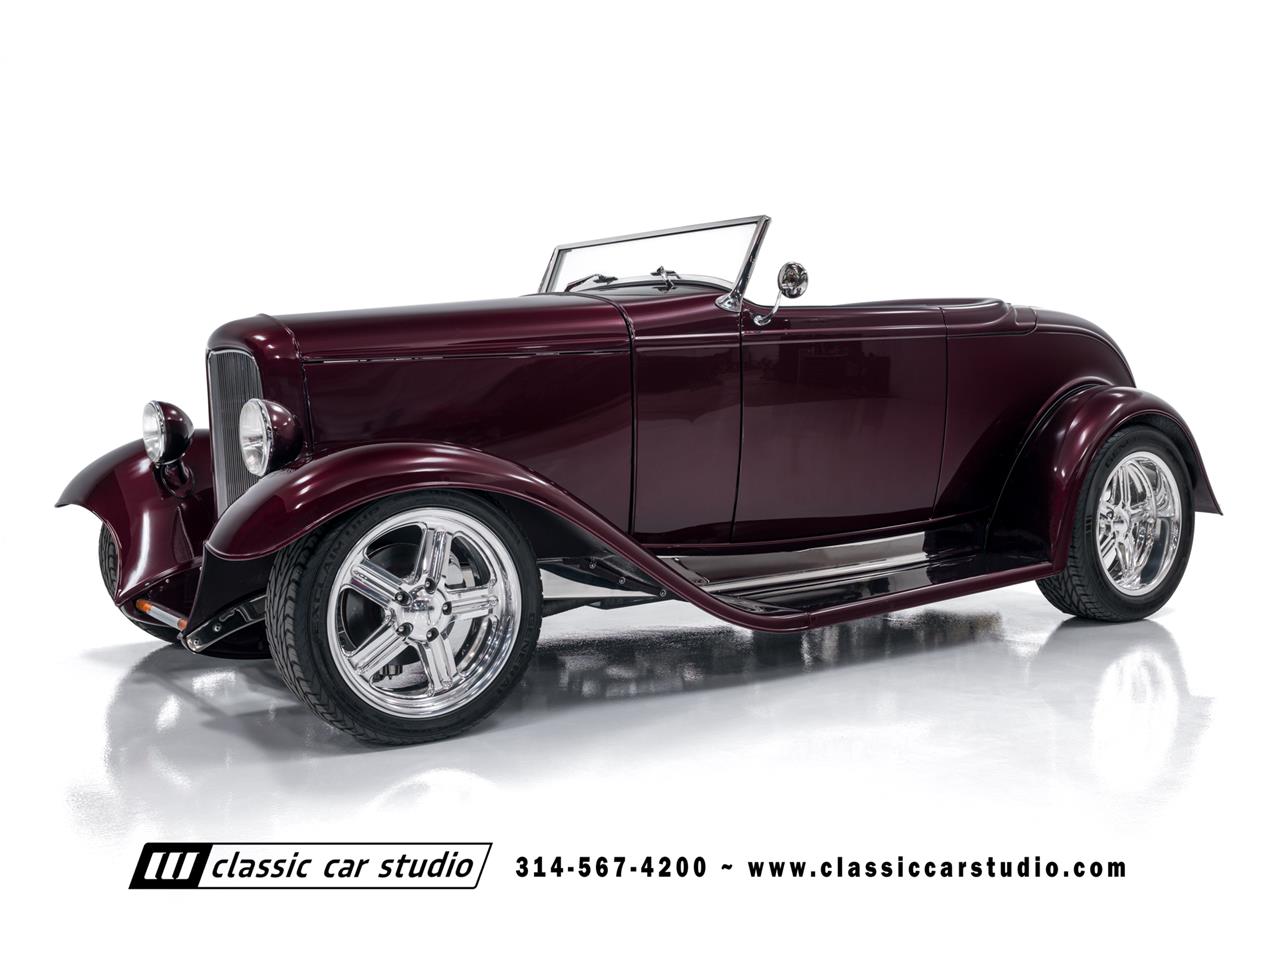 For Sale: 1932 Ford Street Rod in St. Louis, Missouri for sale in Saint Louis, MO